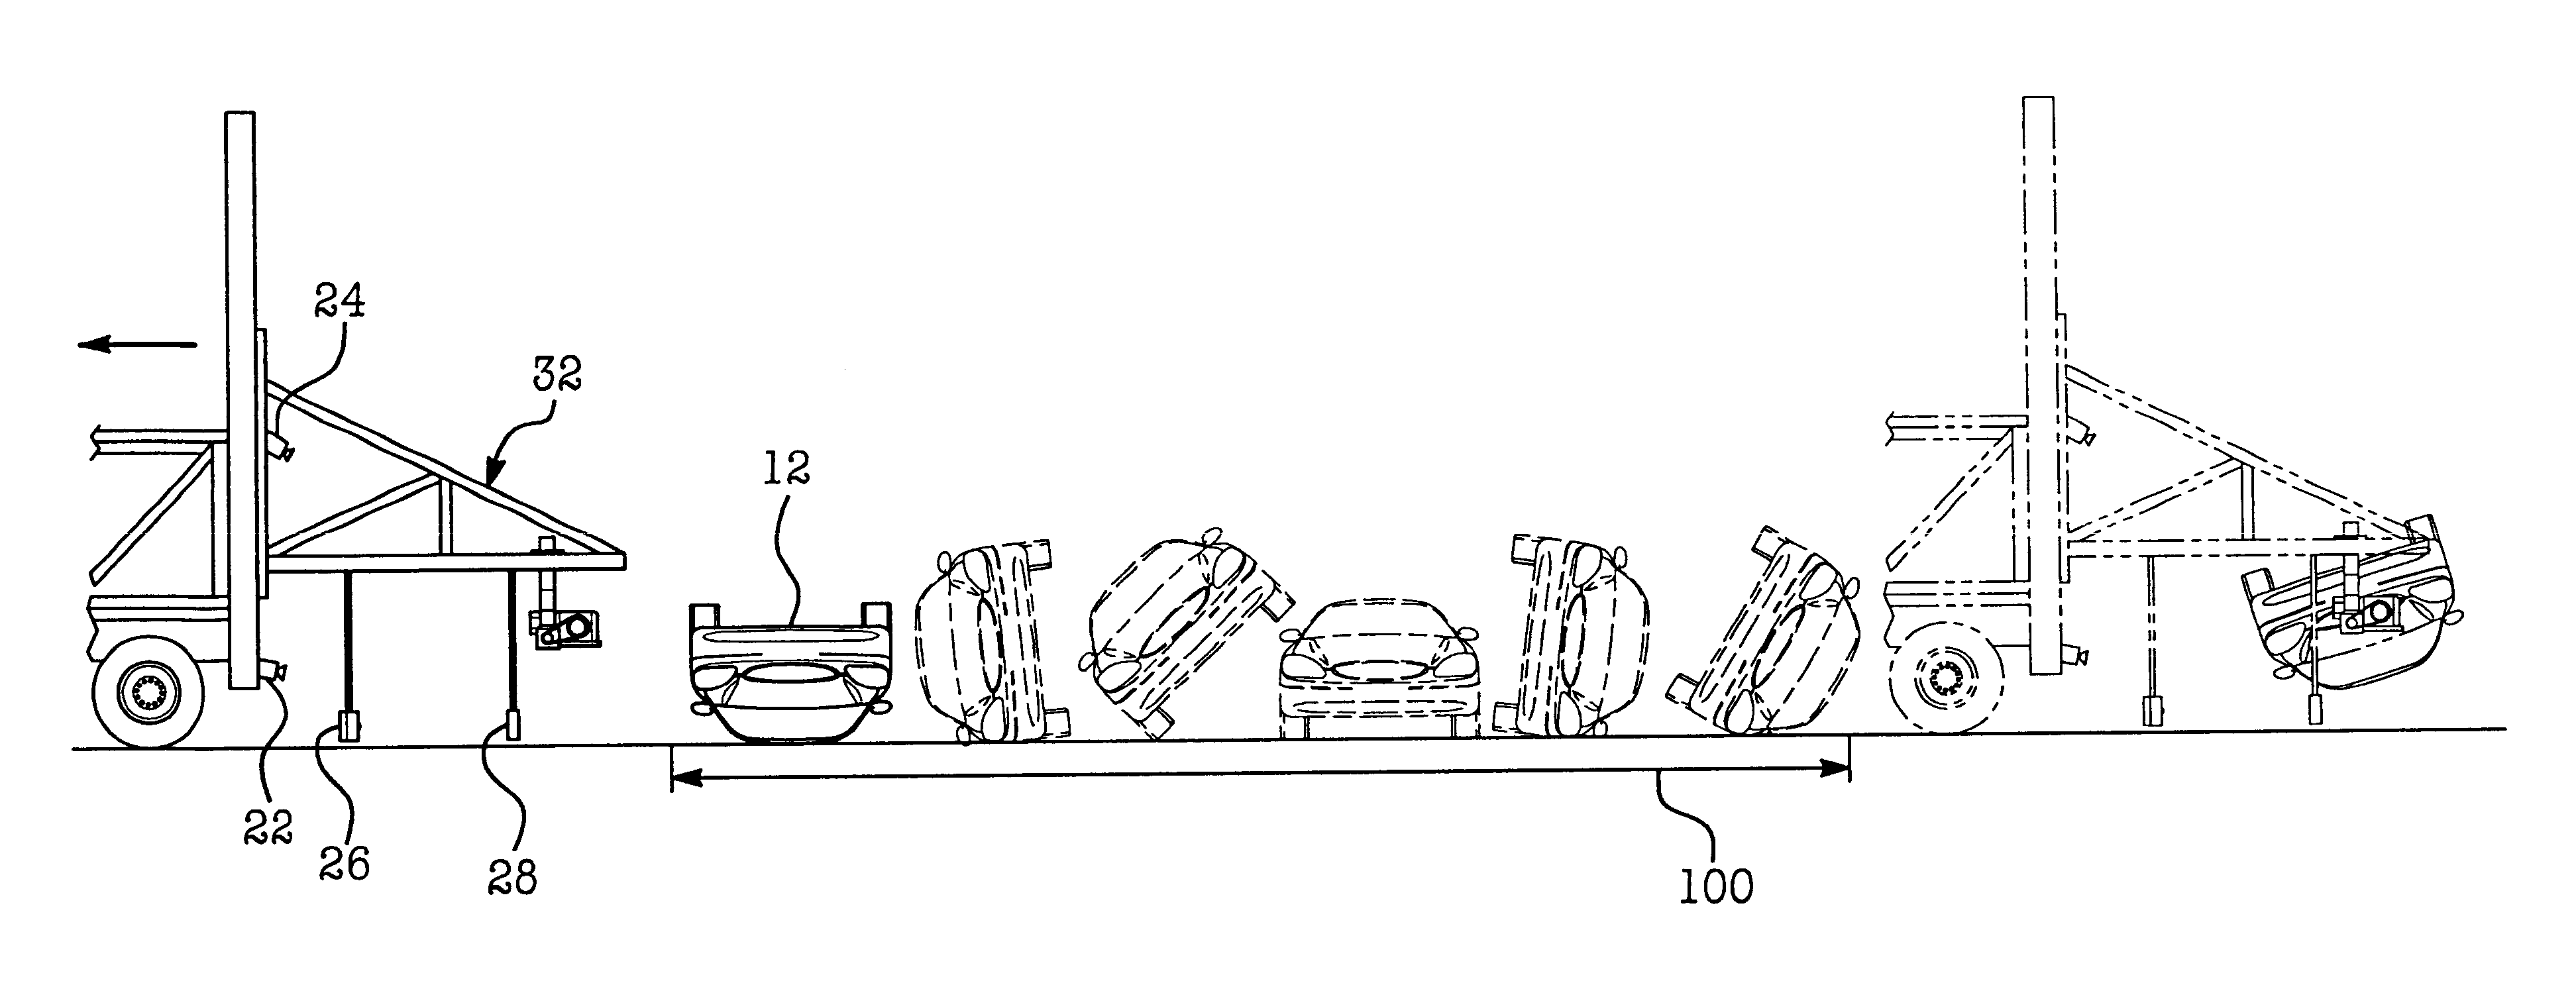 Apparatus and method for vehicle rollover crash testing